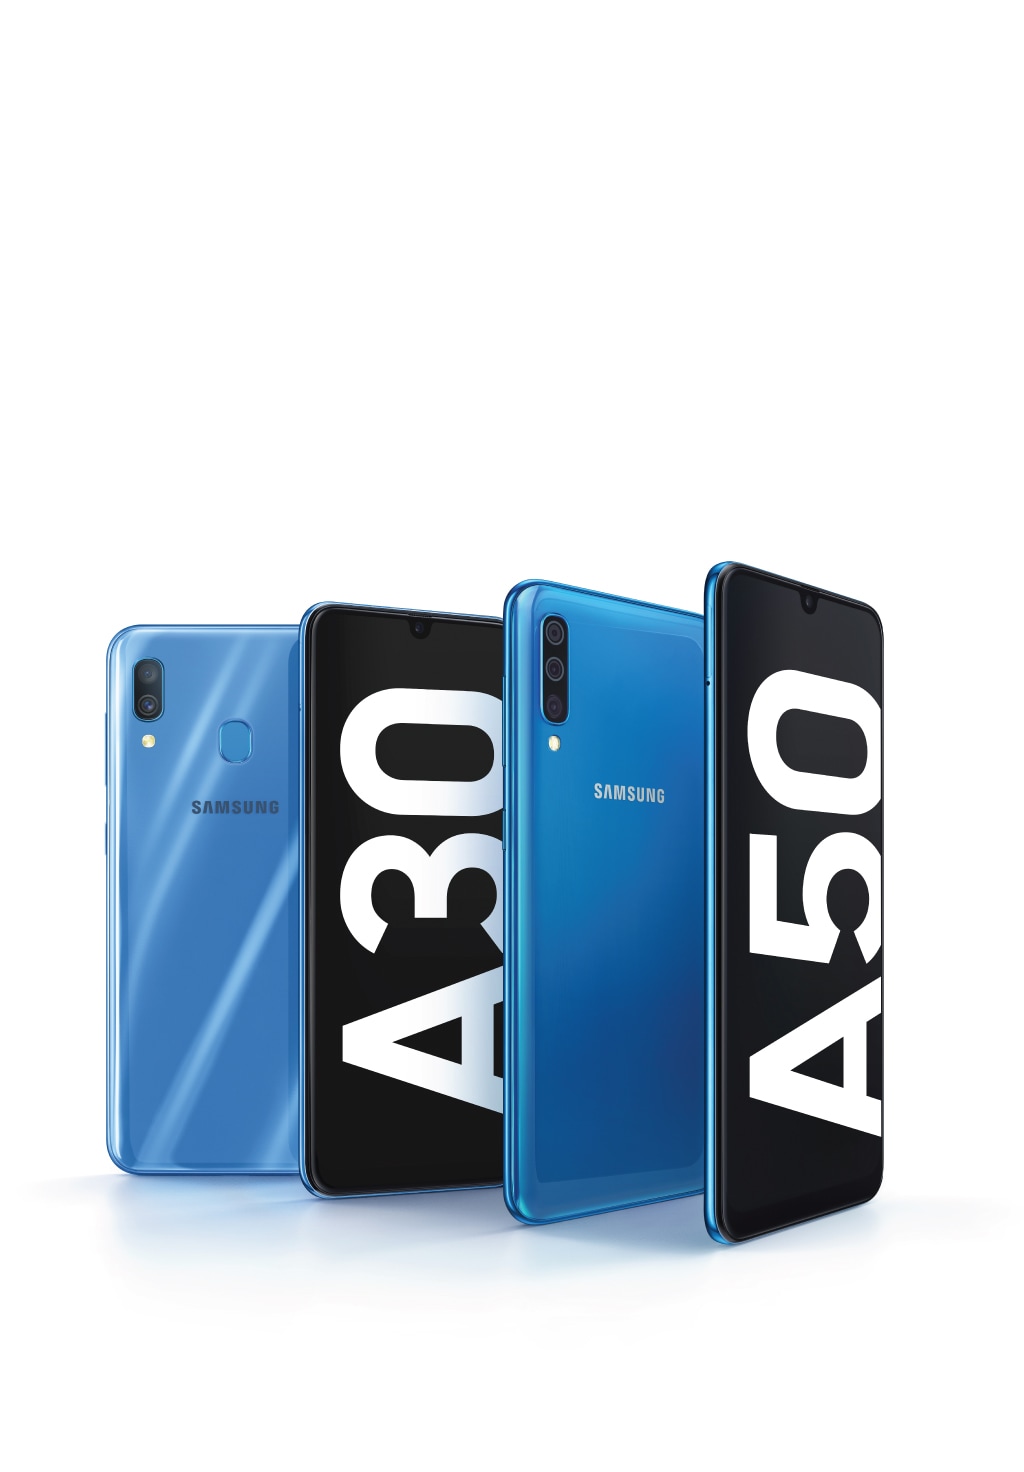 samsung a30 and a50